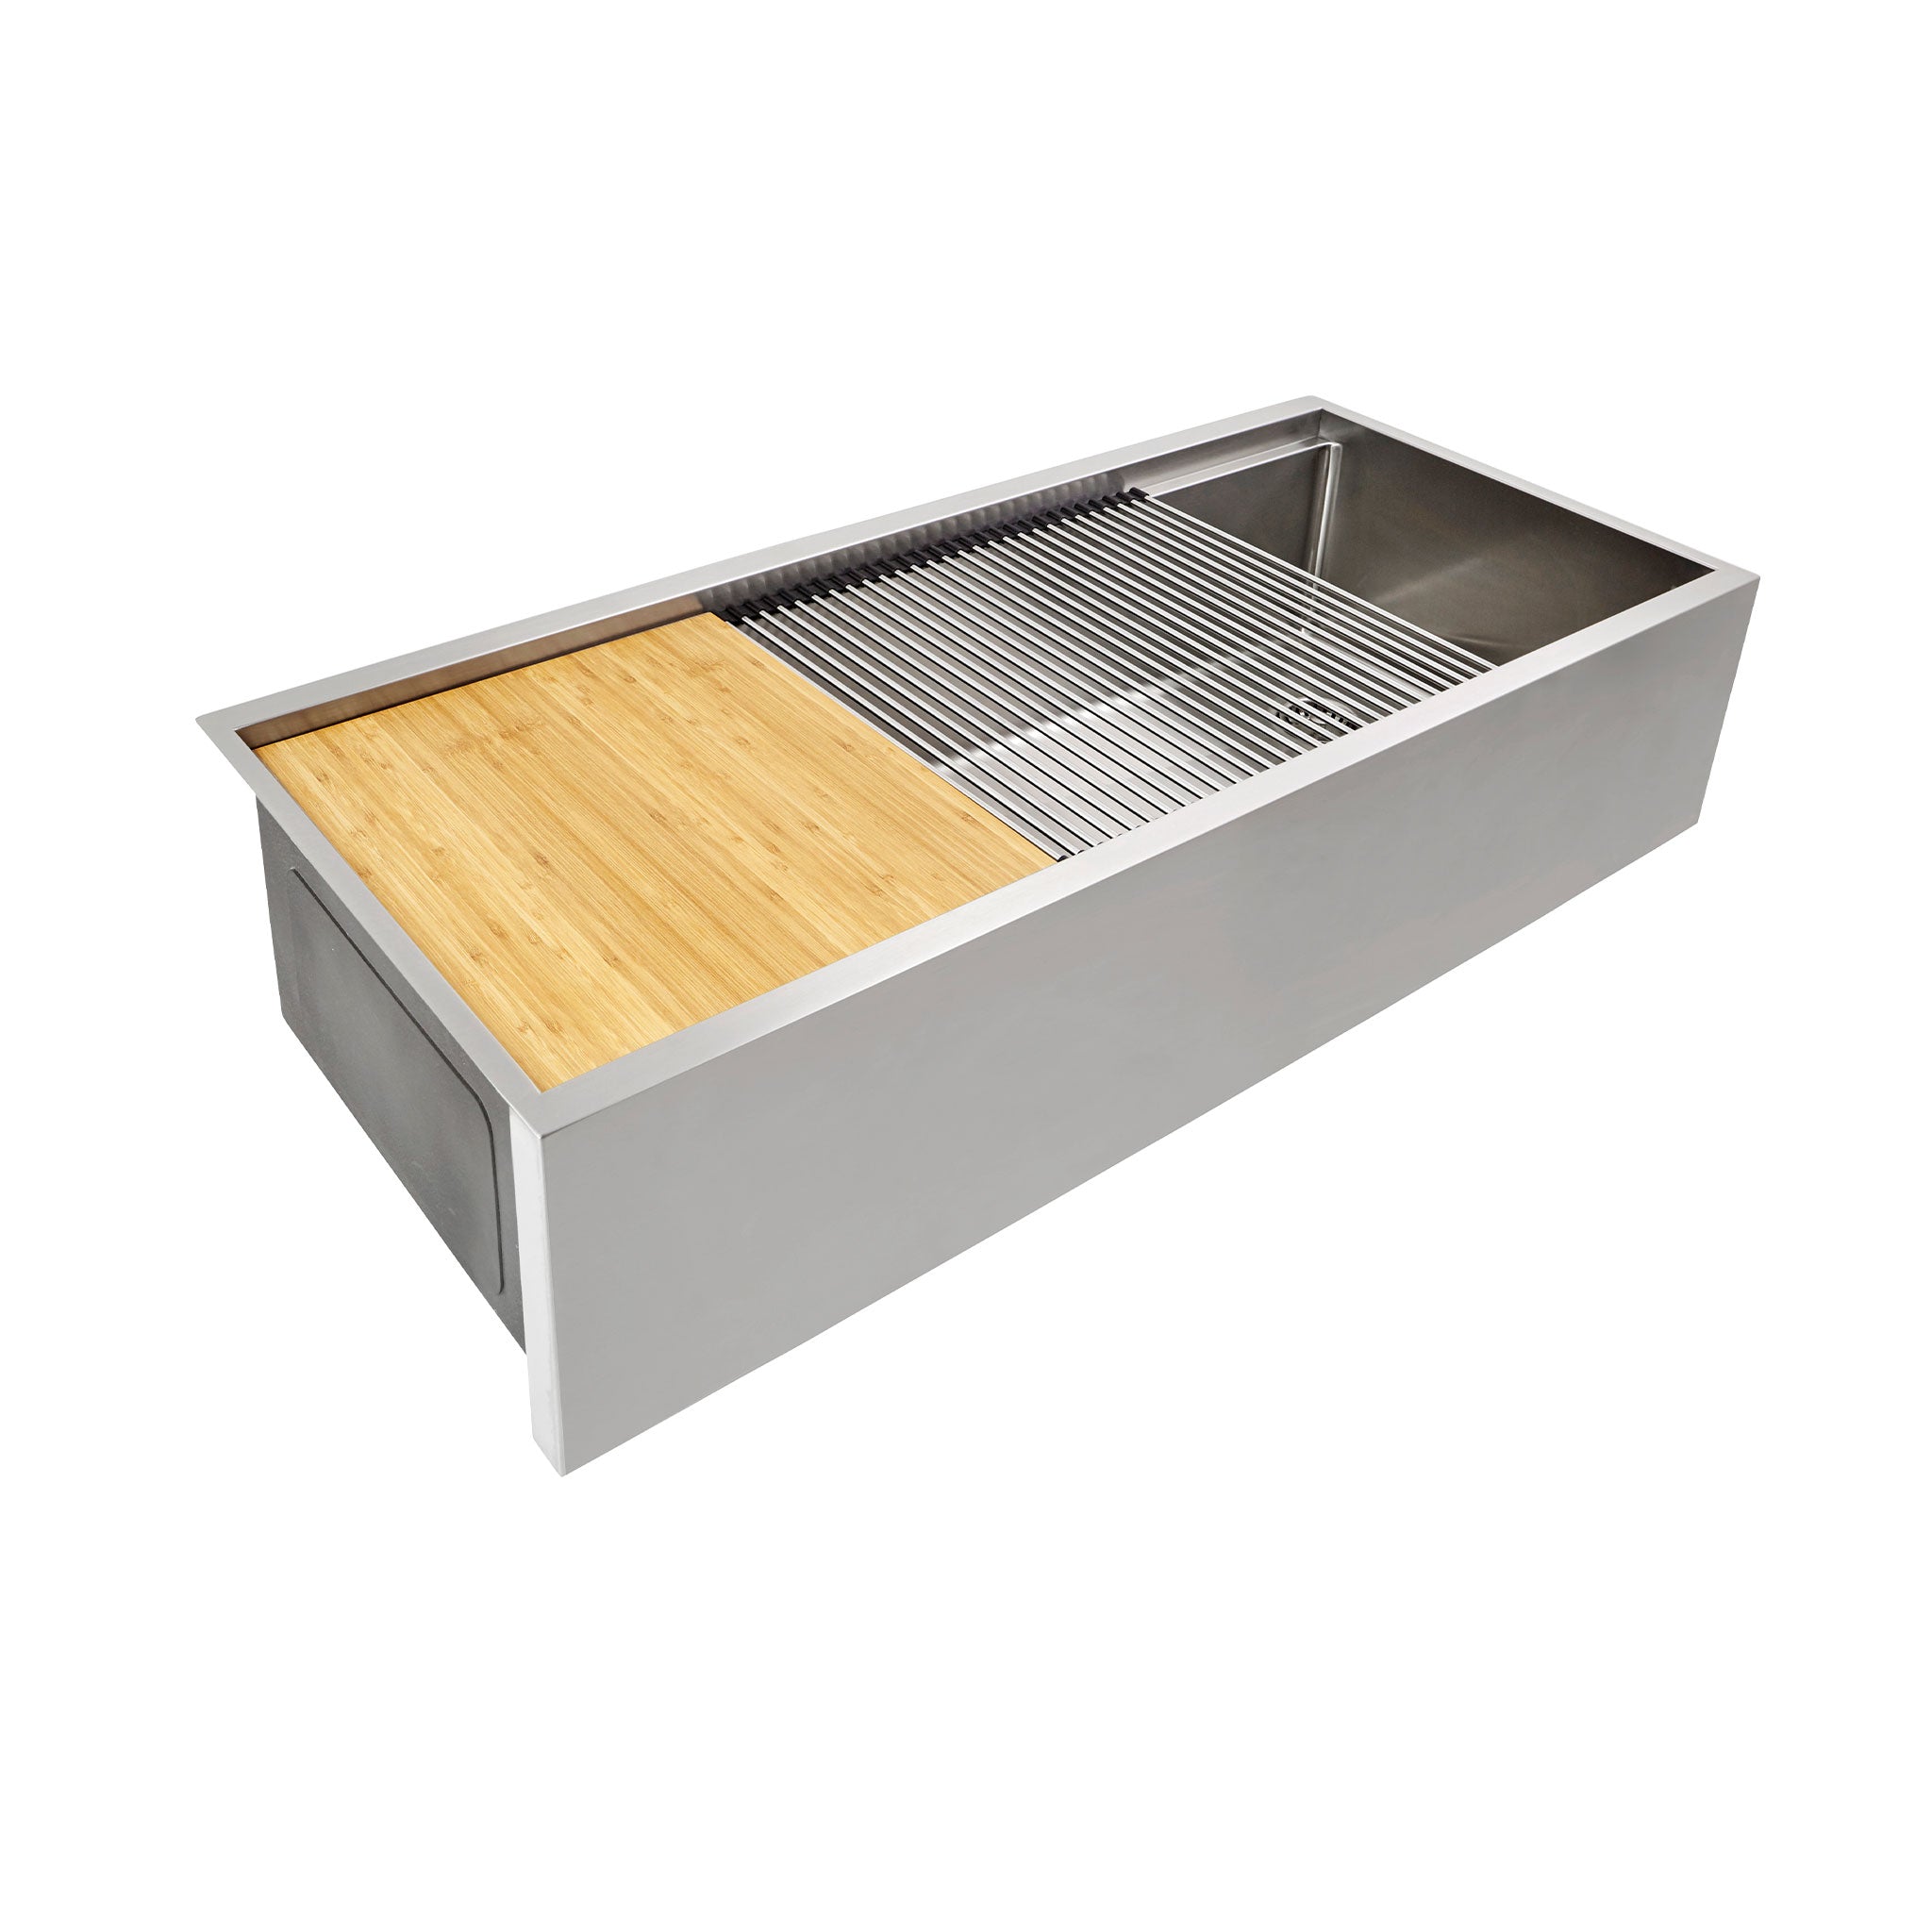 Bamboo Accessories and Stainless Steel Roll mat in a large single basin 46” workstation farmhouse sink from Create Good Sinks